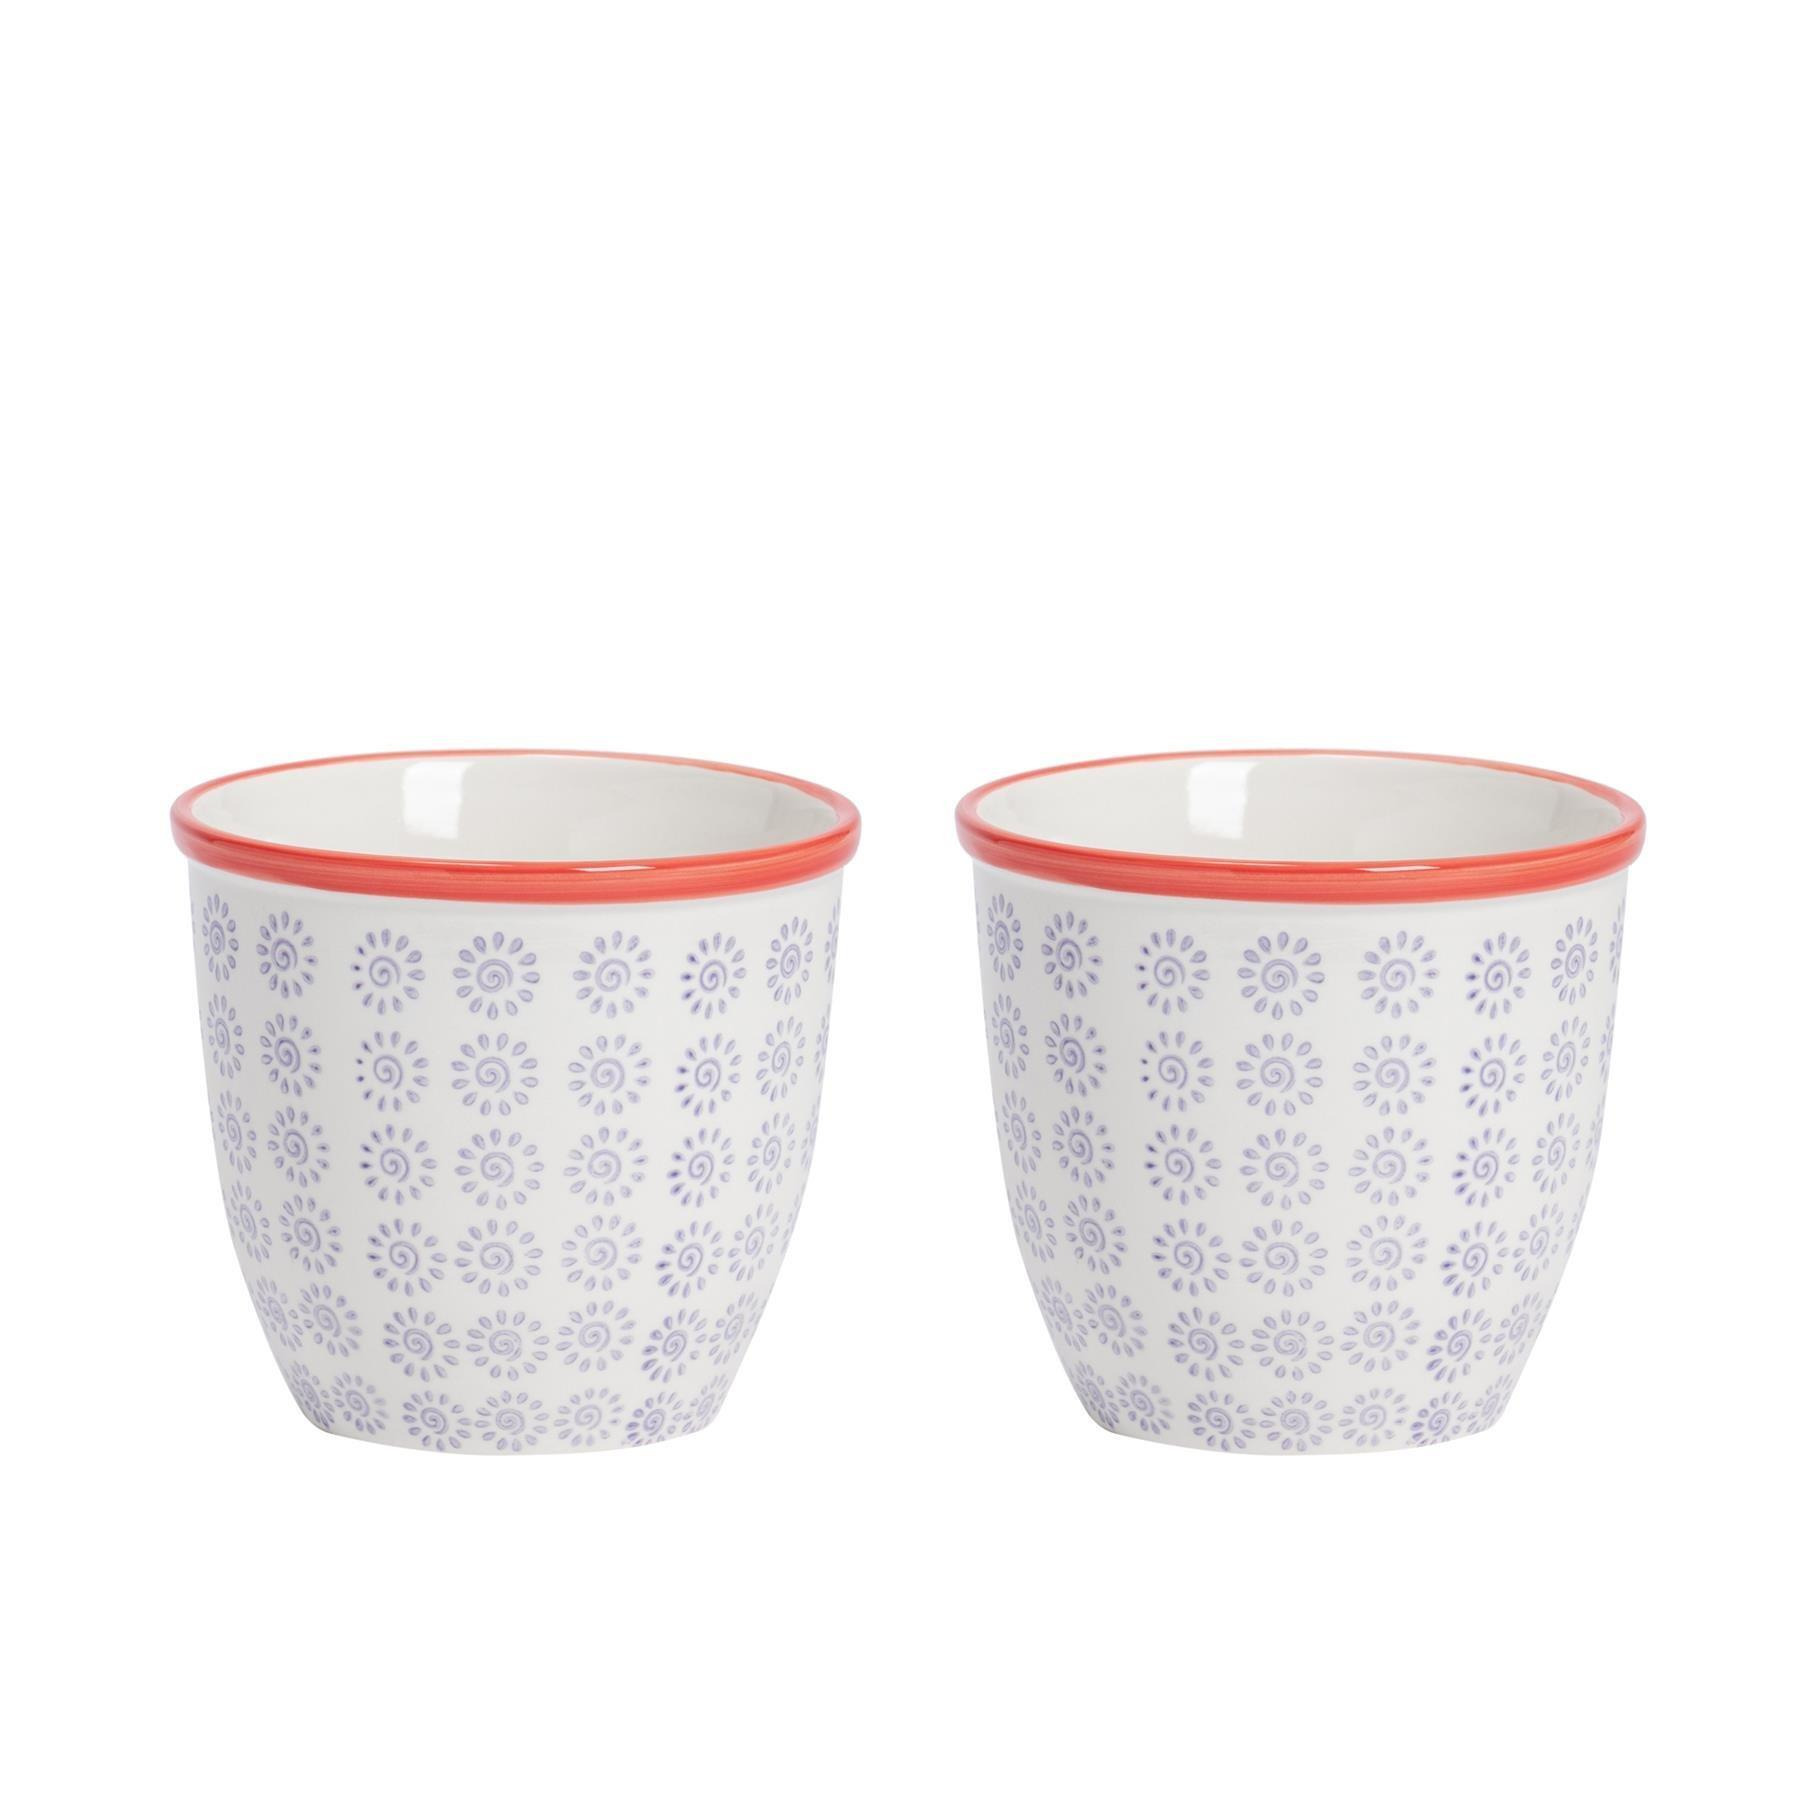 Hand-Printed Plant Pots 14cm Pack of 2 - image 1